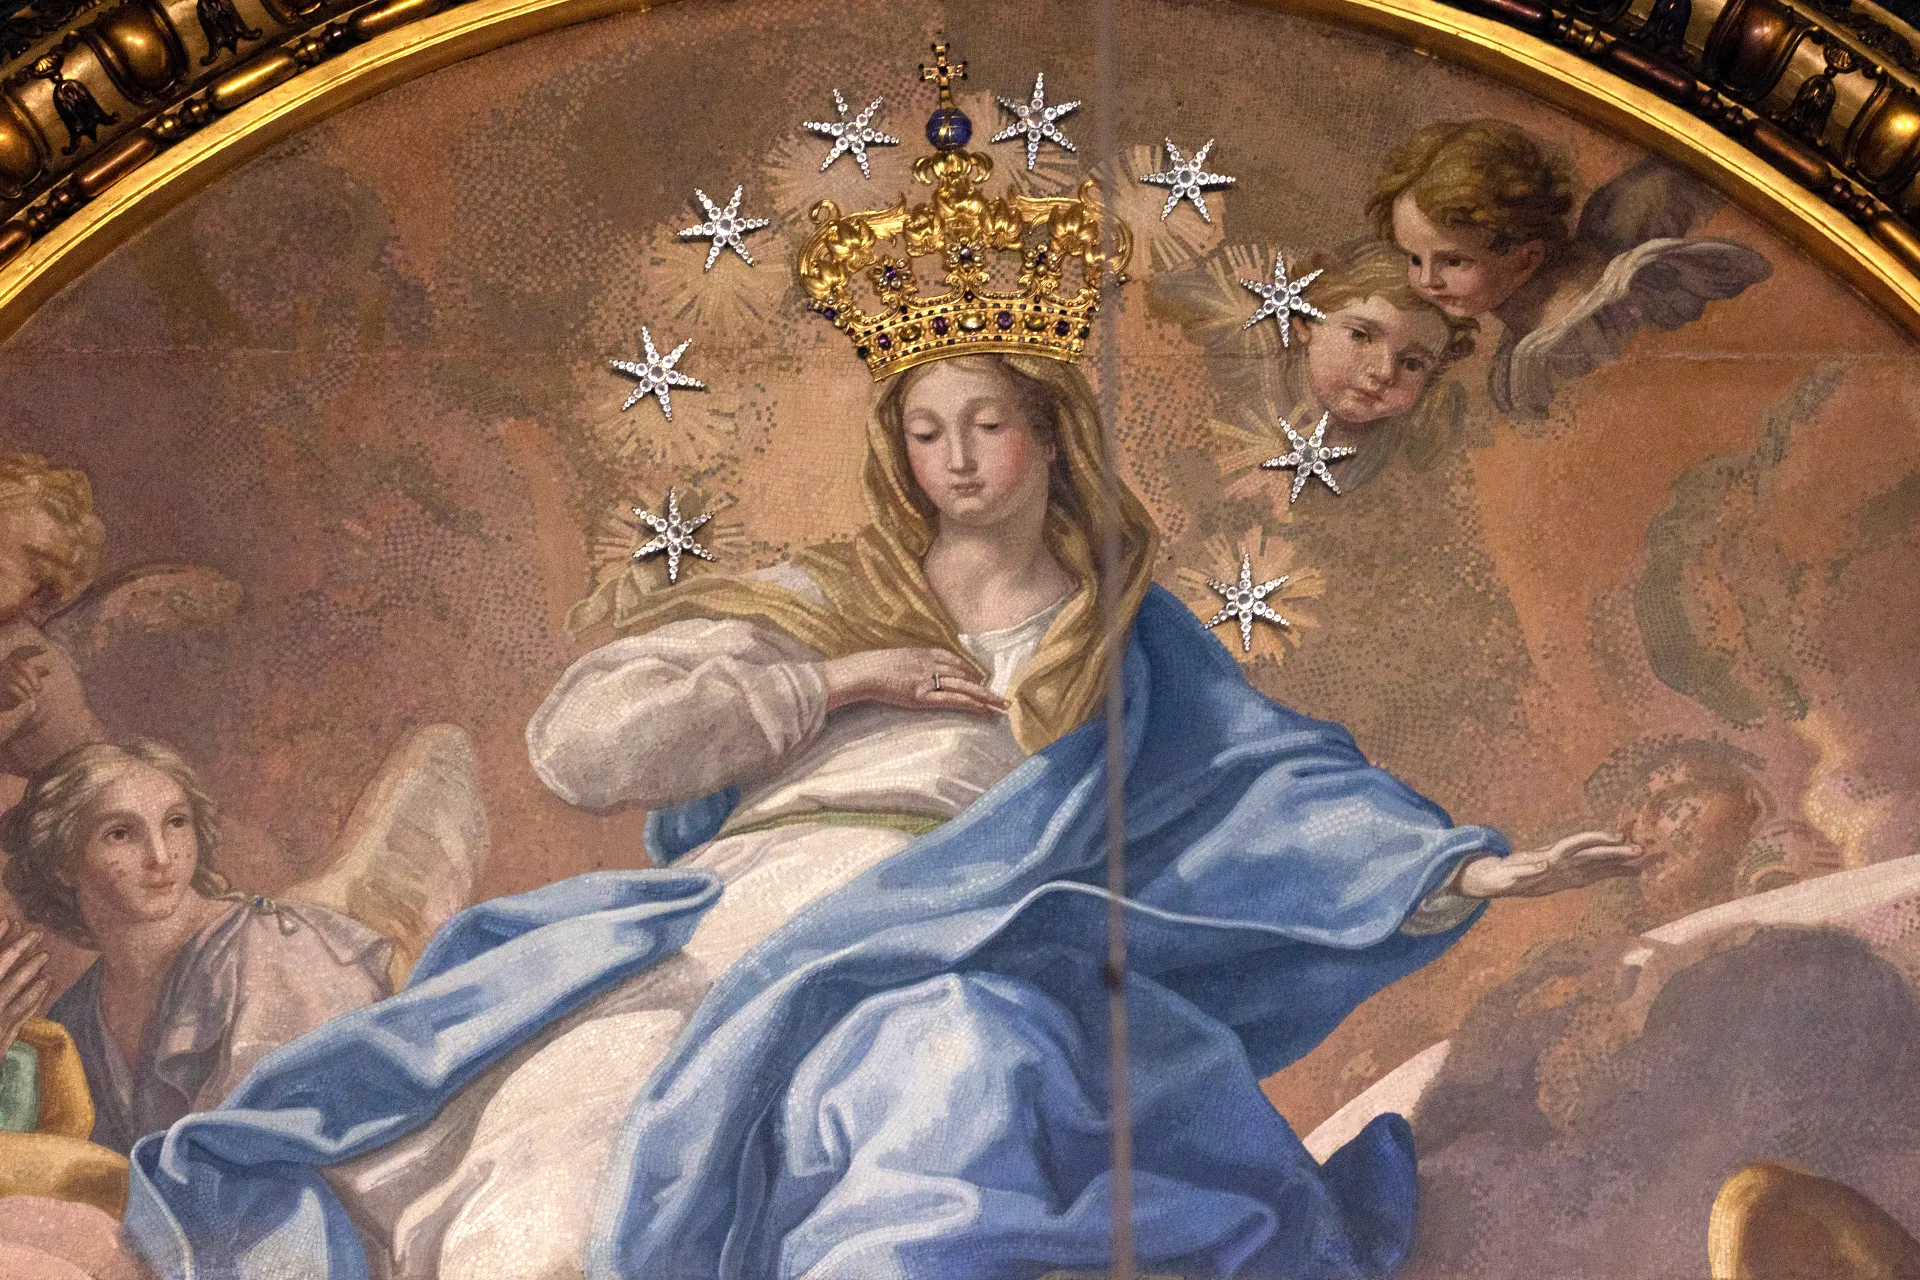 When Pope Pius IX declared the doctrine of the Immaculate Conception of the Virgin Mary on December 8, 1854, he had a golden crown added to the mosaic of Mary, Virgin Immaculate, in the Chapel of the Choir in St. Peter's Basilica.?w=200&h=150